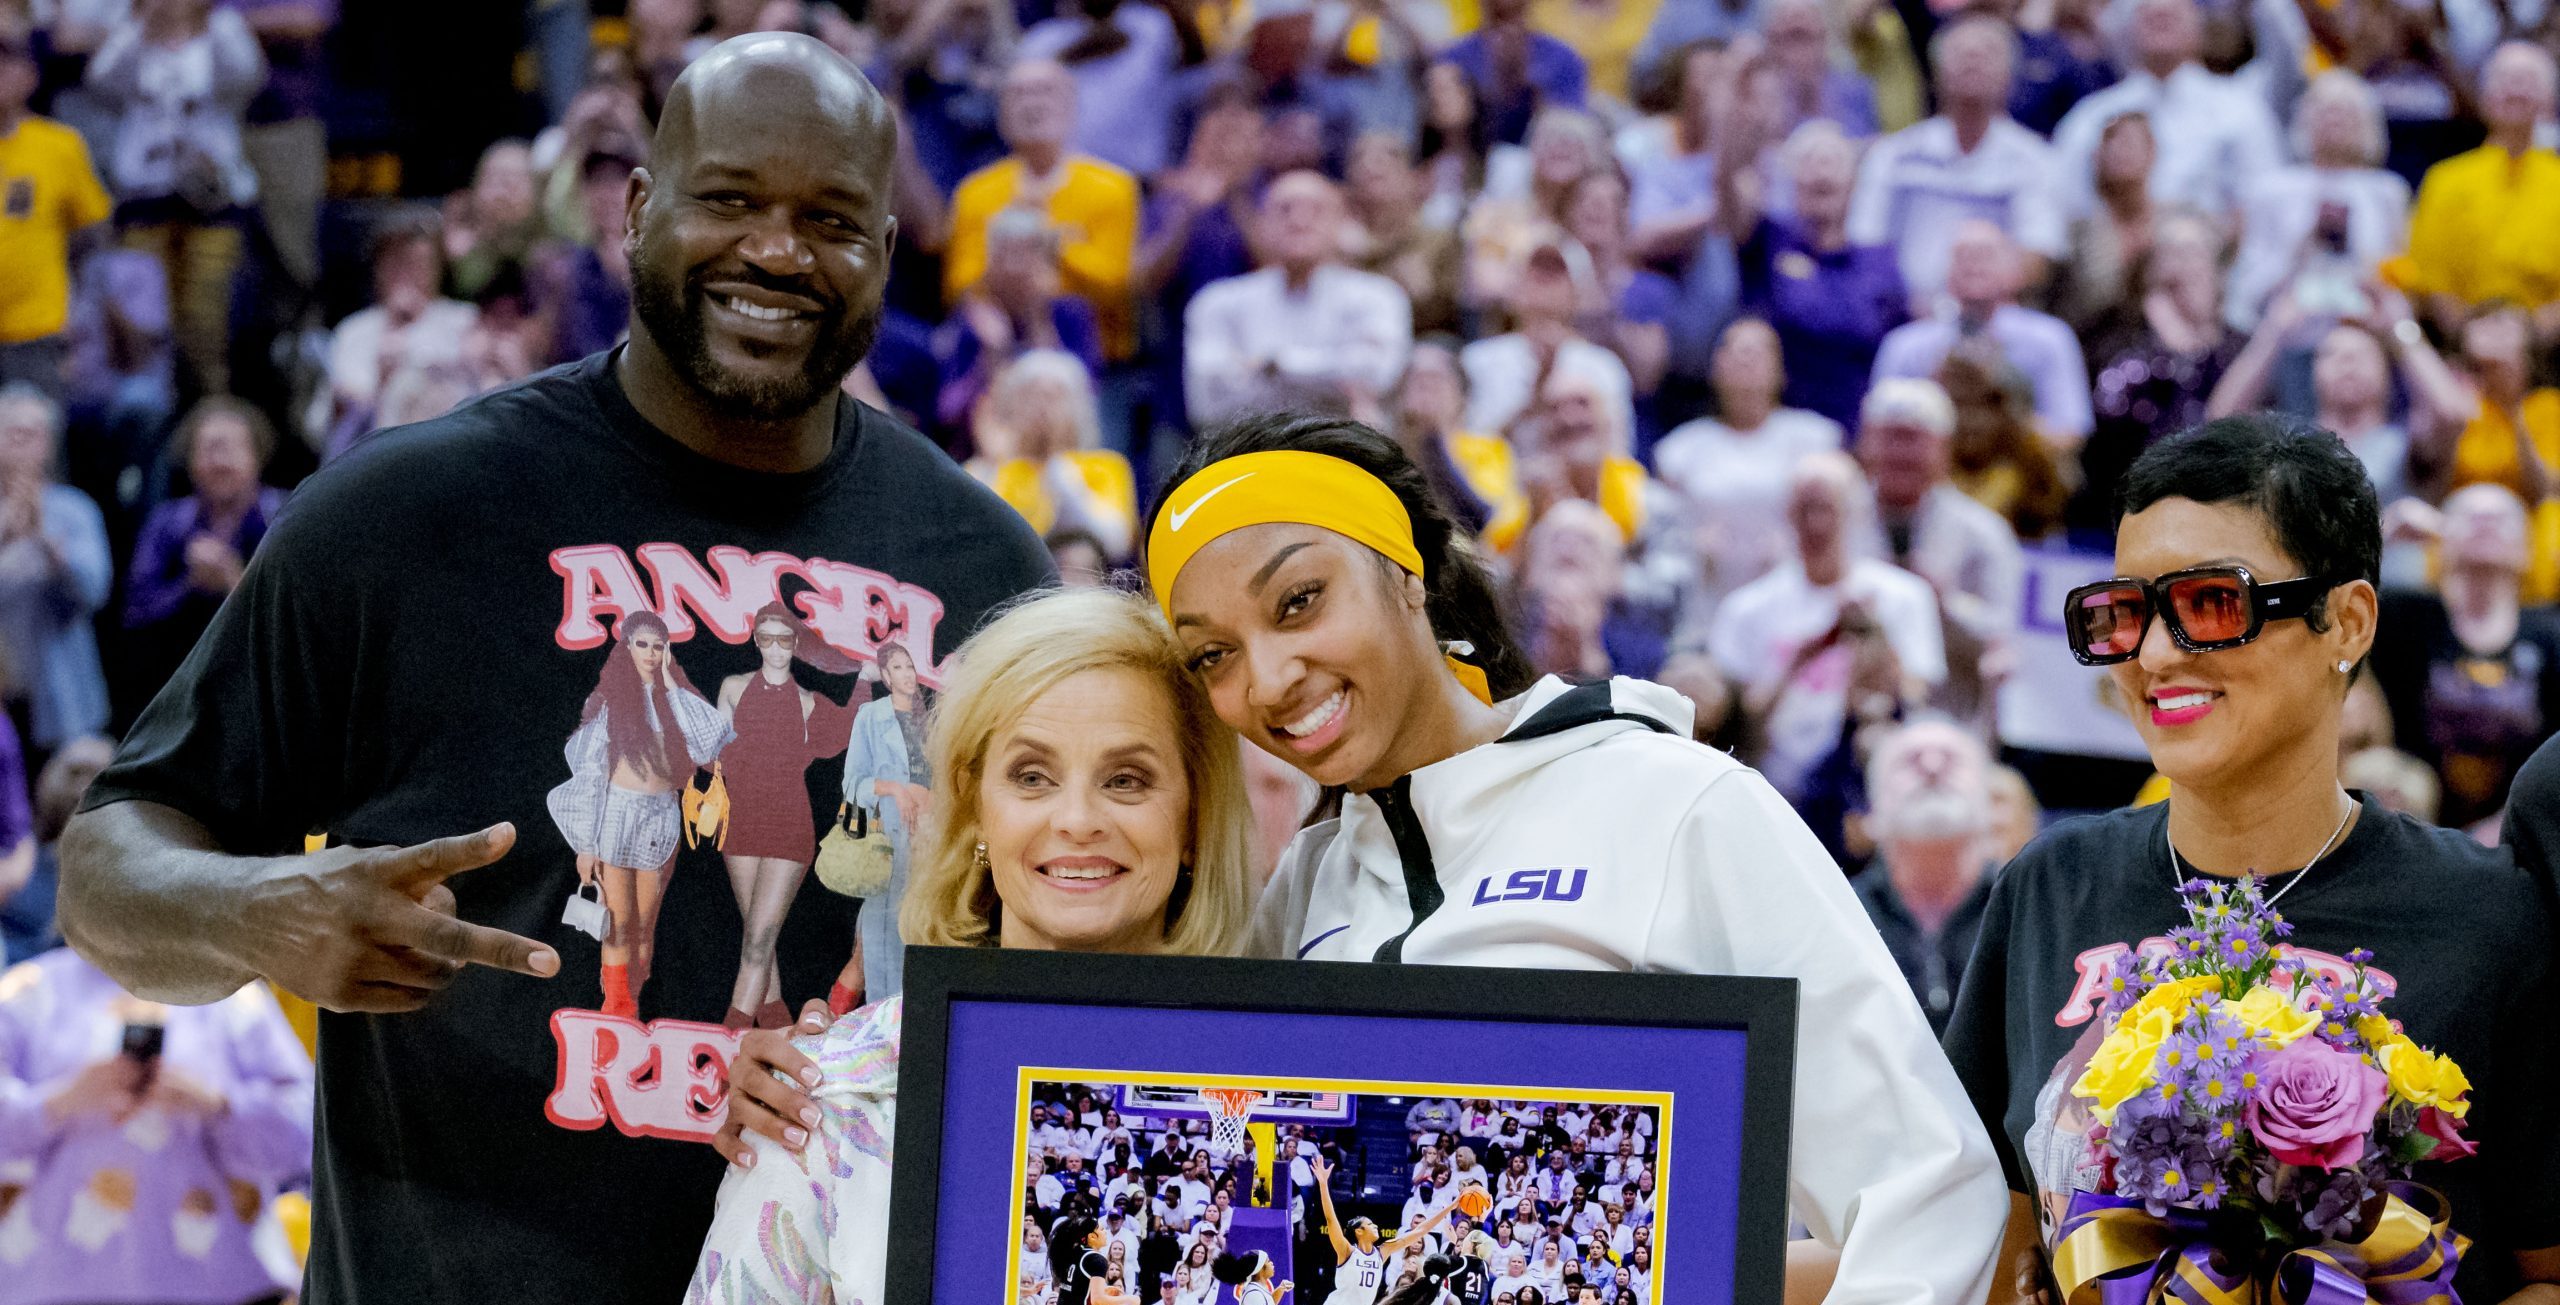 Shaquille O'Neal alongside Angel Reese and her family on her Senior Day